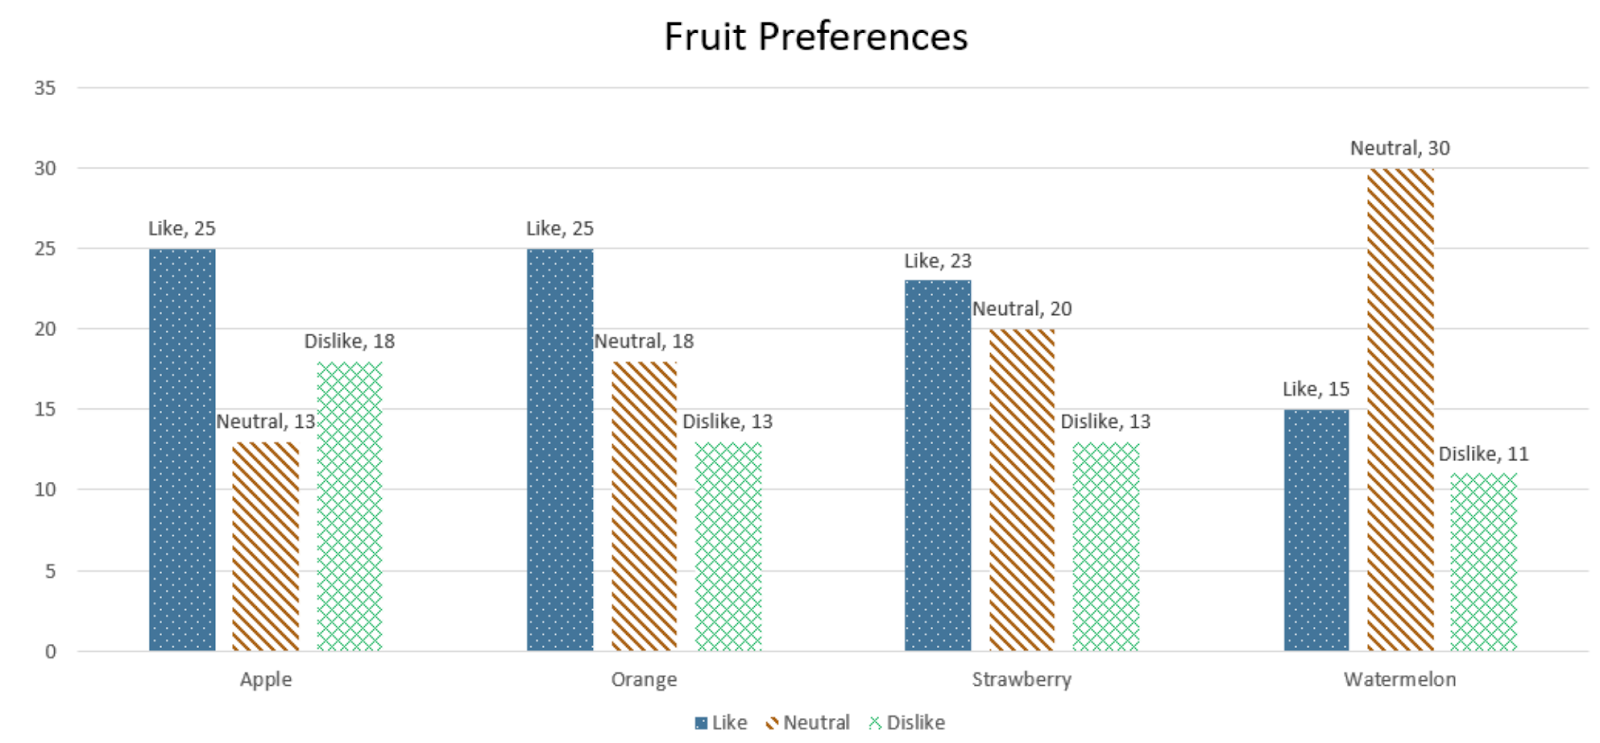 Image of the same bar chart, titled 'Fruit Preferences'. In addition to the elements described above, each bar in the bar chart (grouped by fruit type) is also labelled with the preference and number of respondents, which appears at the top of each respective bar. From left to right: Apples - 25 Like, 13 Neutral, 18 Dislike. Oranges - 25 Like, 18 Neutral, 13 Dislike. Strawberries - 23 Like, 20 Neutral, 13 Dislike. Watermelons - 15 Like, 30 Neutral, 11 Dislike. 